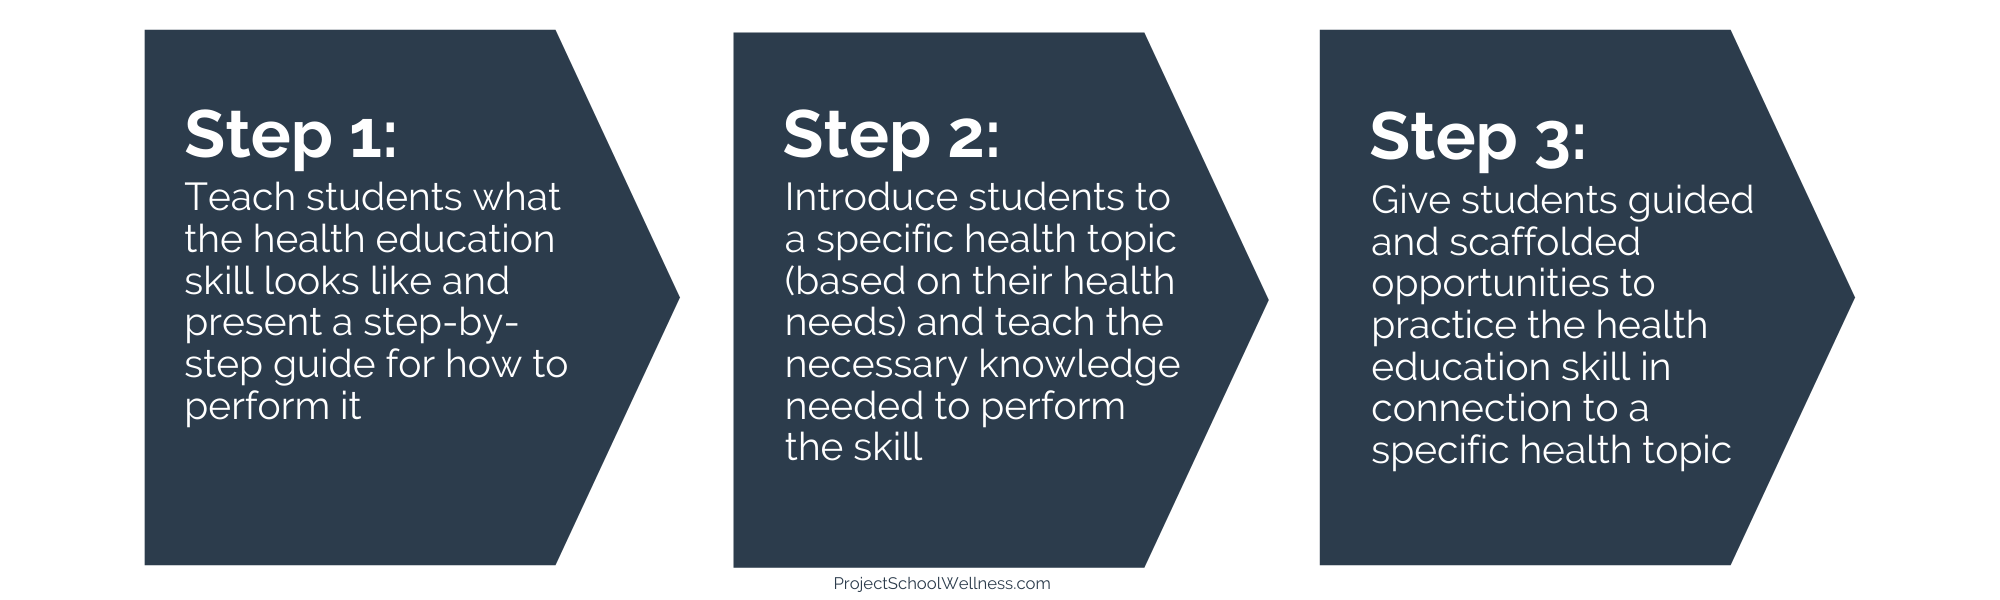 How to Teach students what the health education skill looks like and present a step-by-step guide for how to perform it (1)